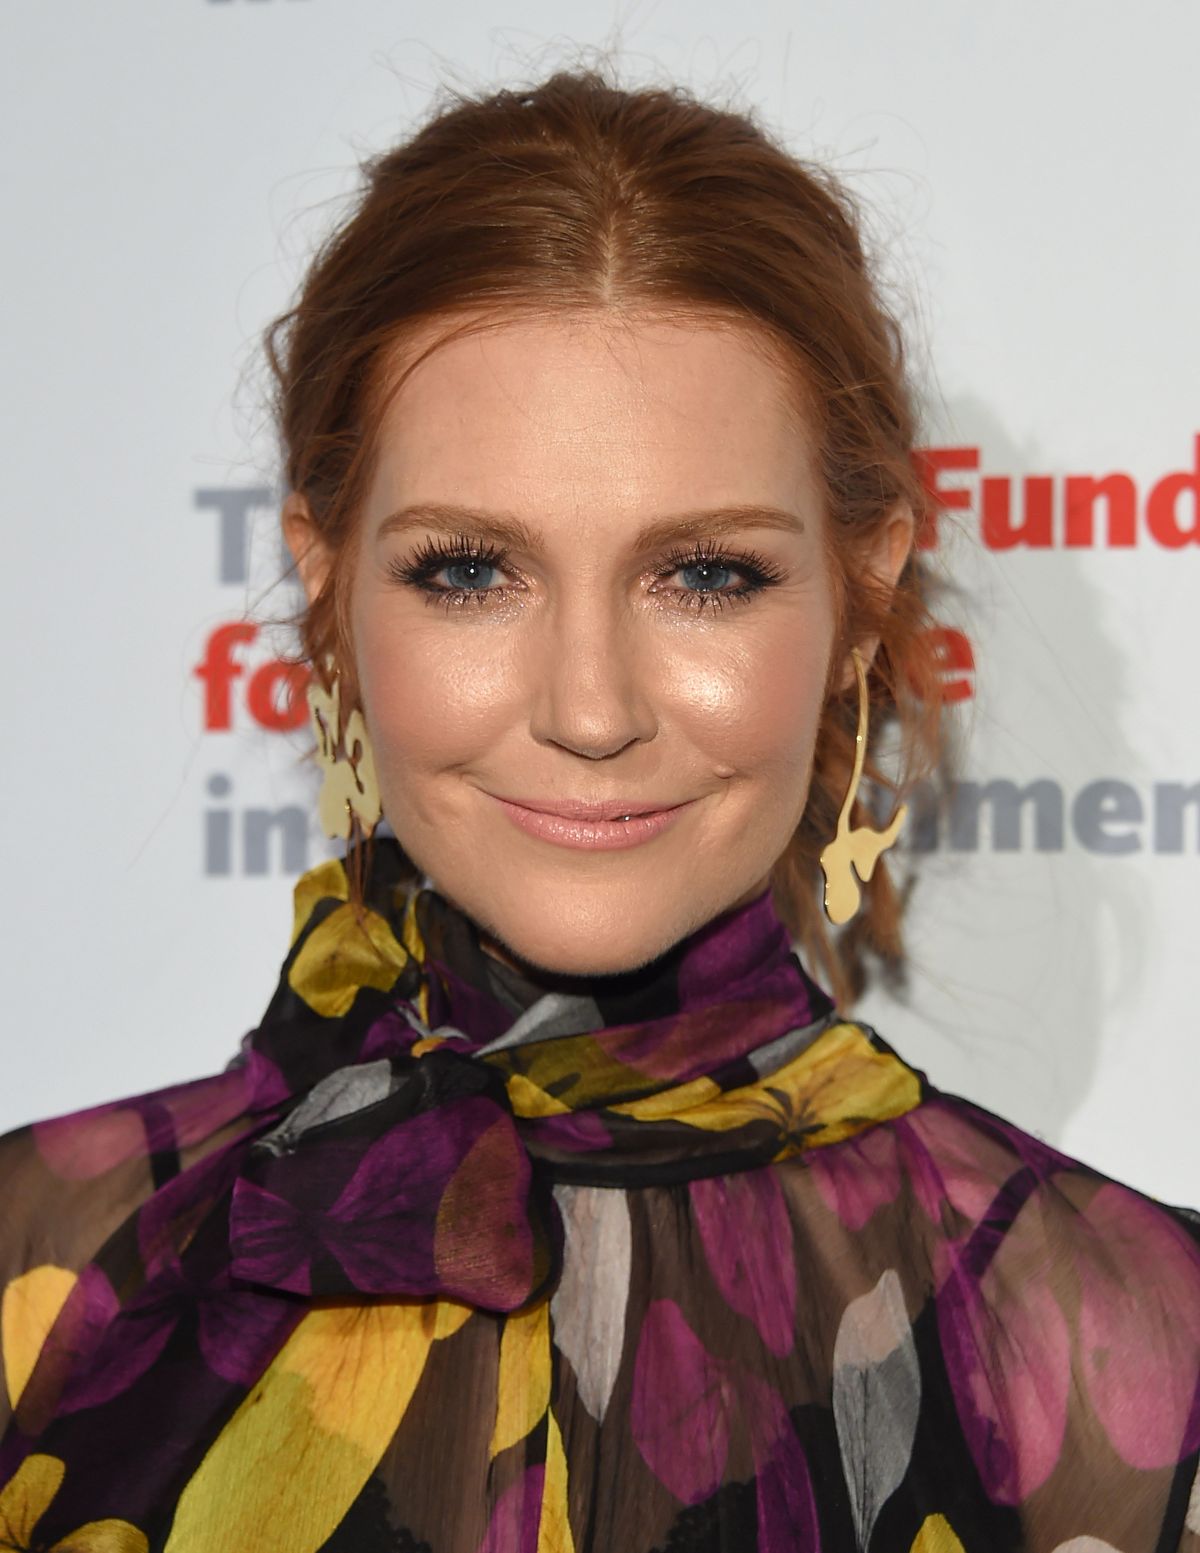 Darby Stanchfield At Scandal Finale Live Stage Reading In Hollywood 04 